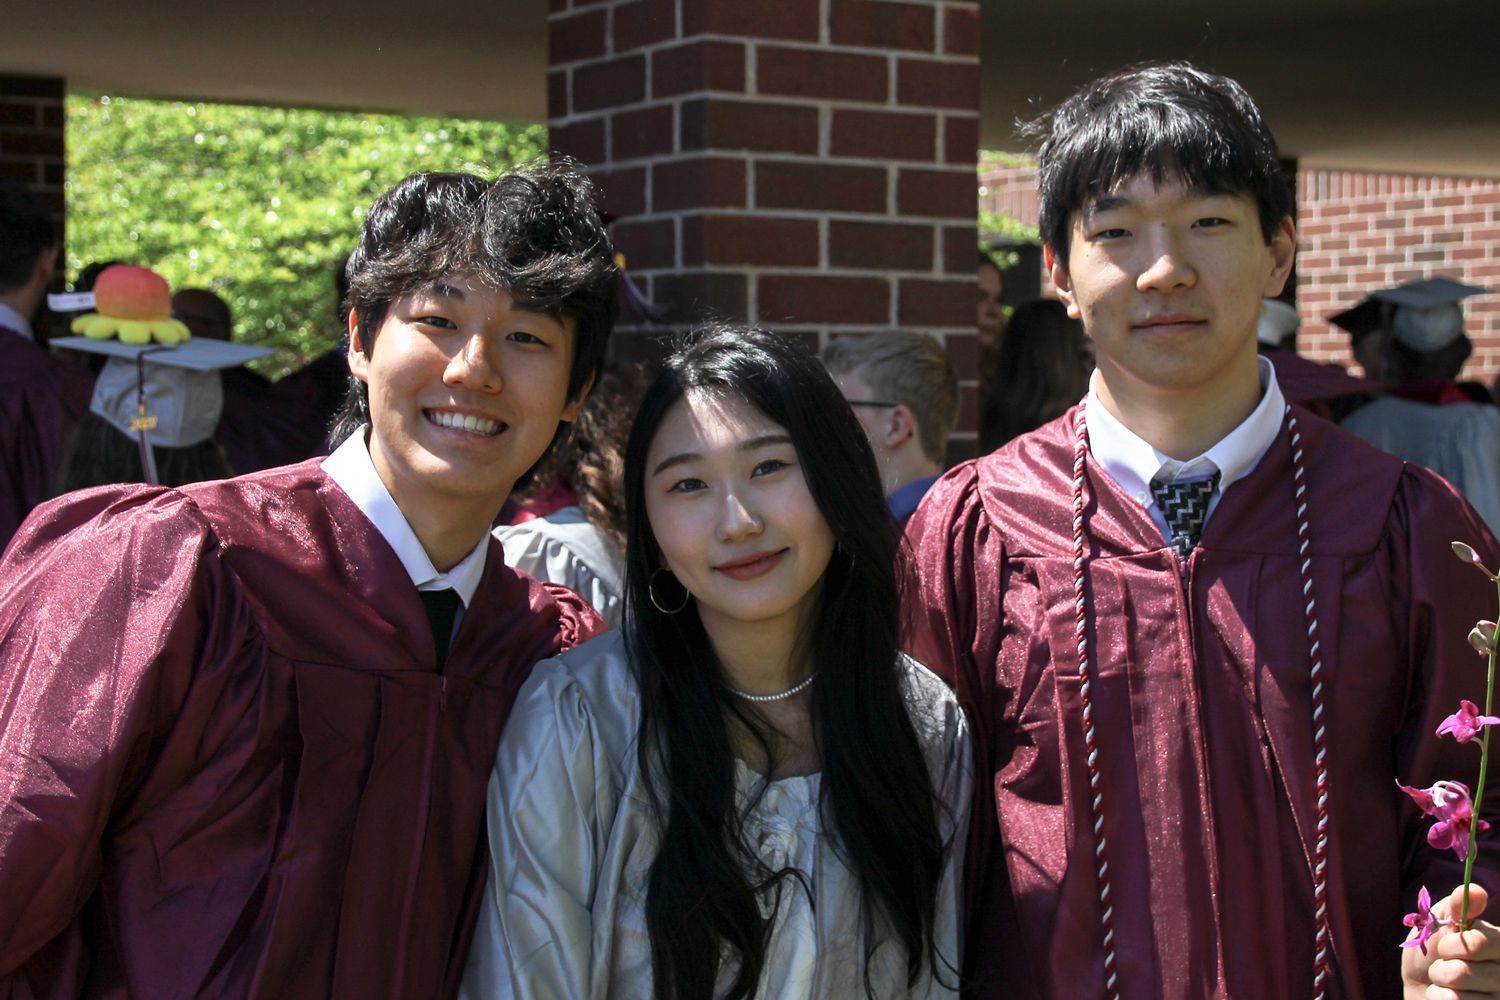 Two guys and a girl, smiling for the camera after the ceremony